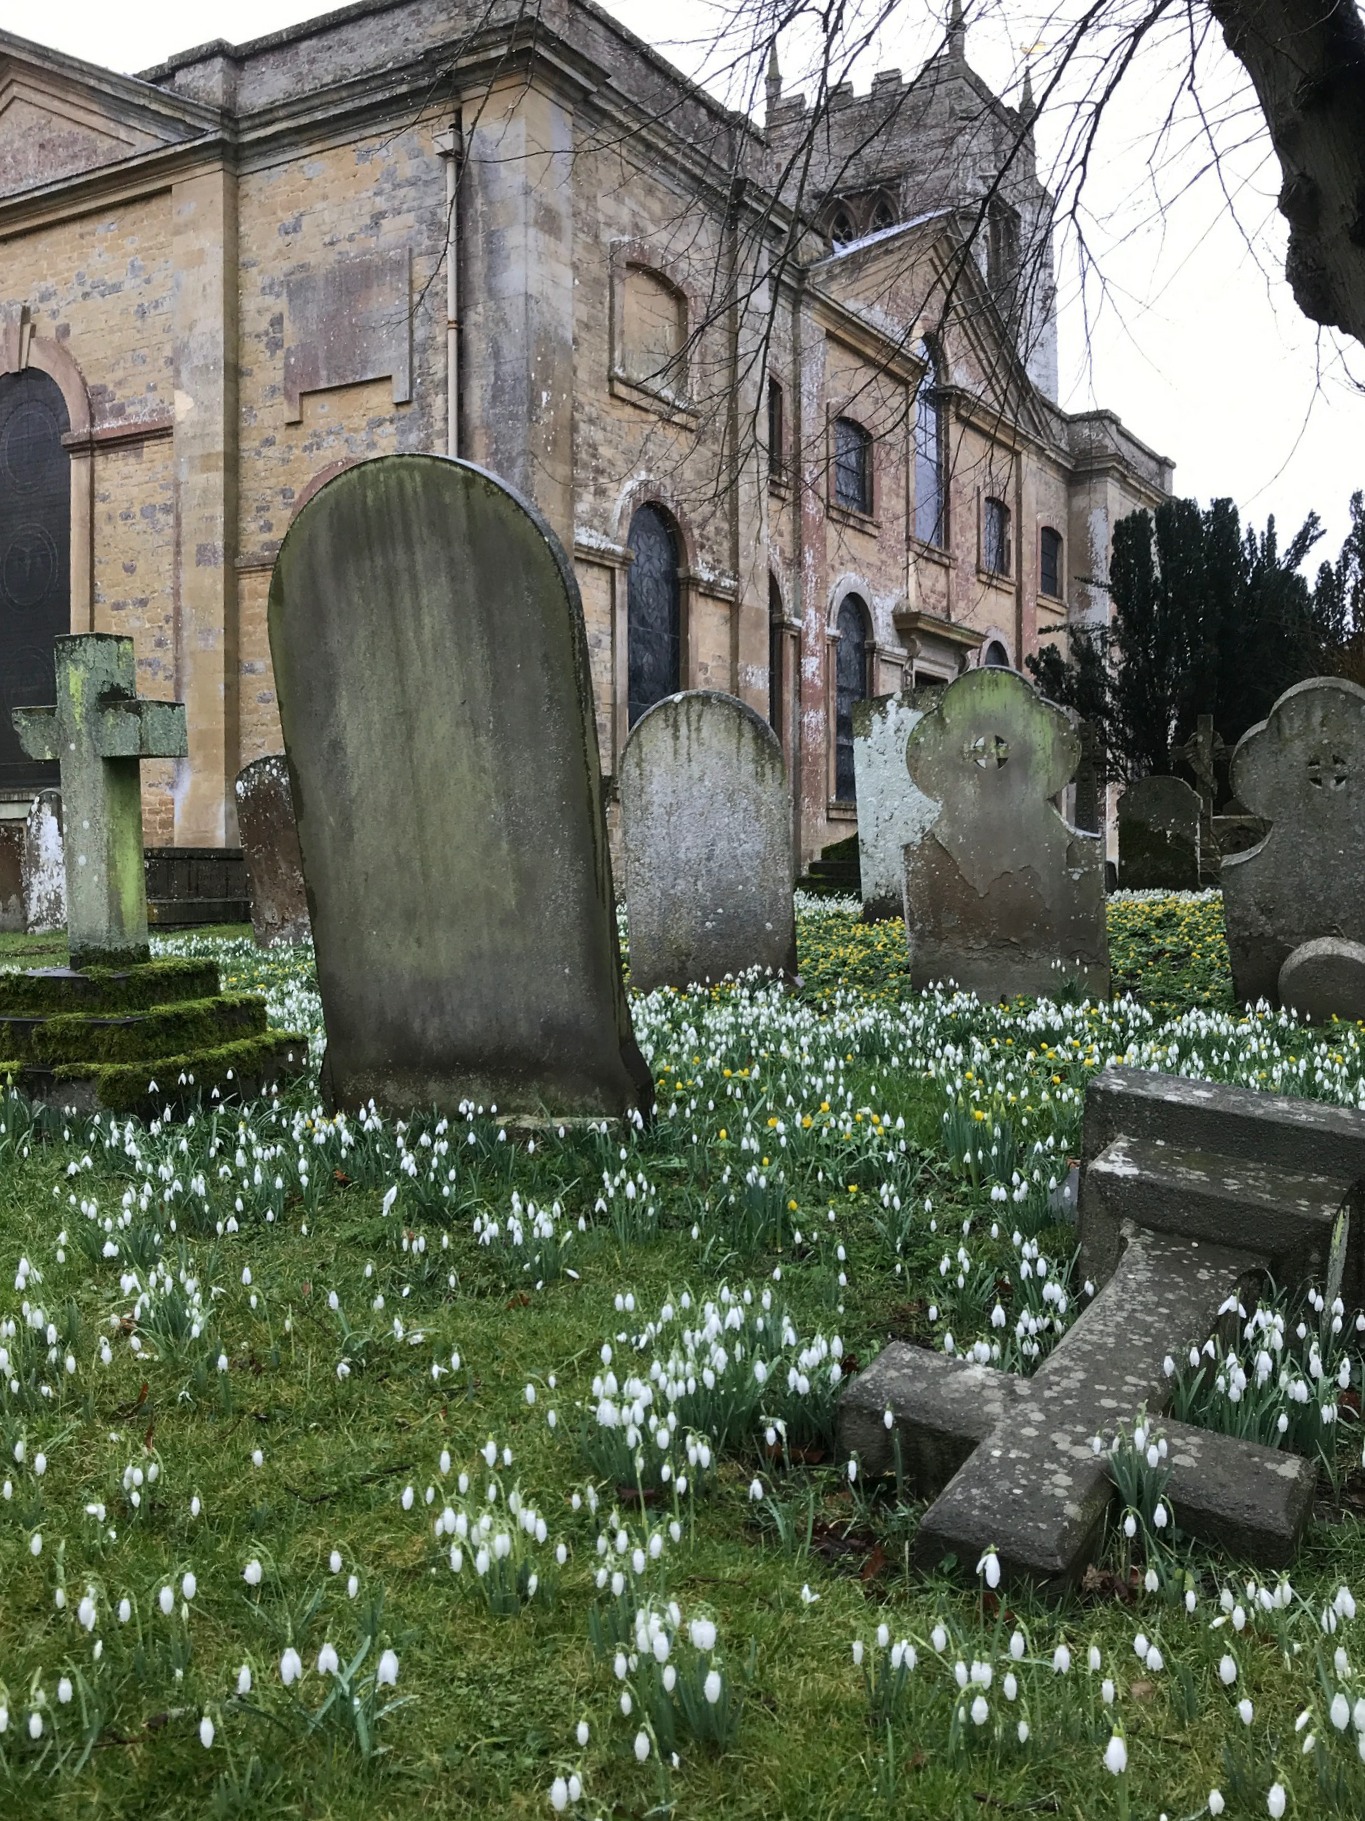 Apricot Village: The glory of snowdrops that enhance so many graveyards in late winter.